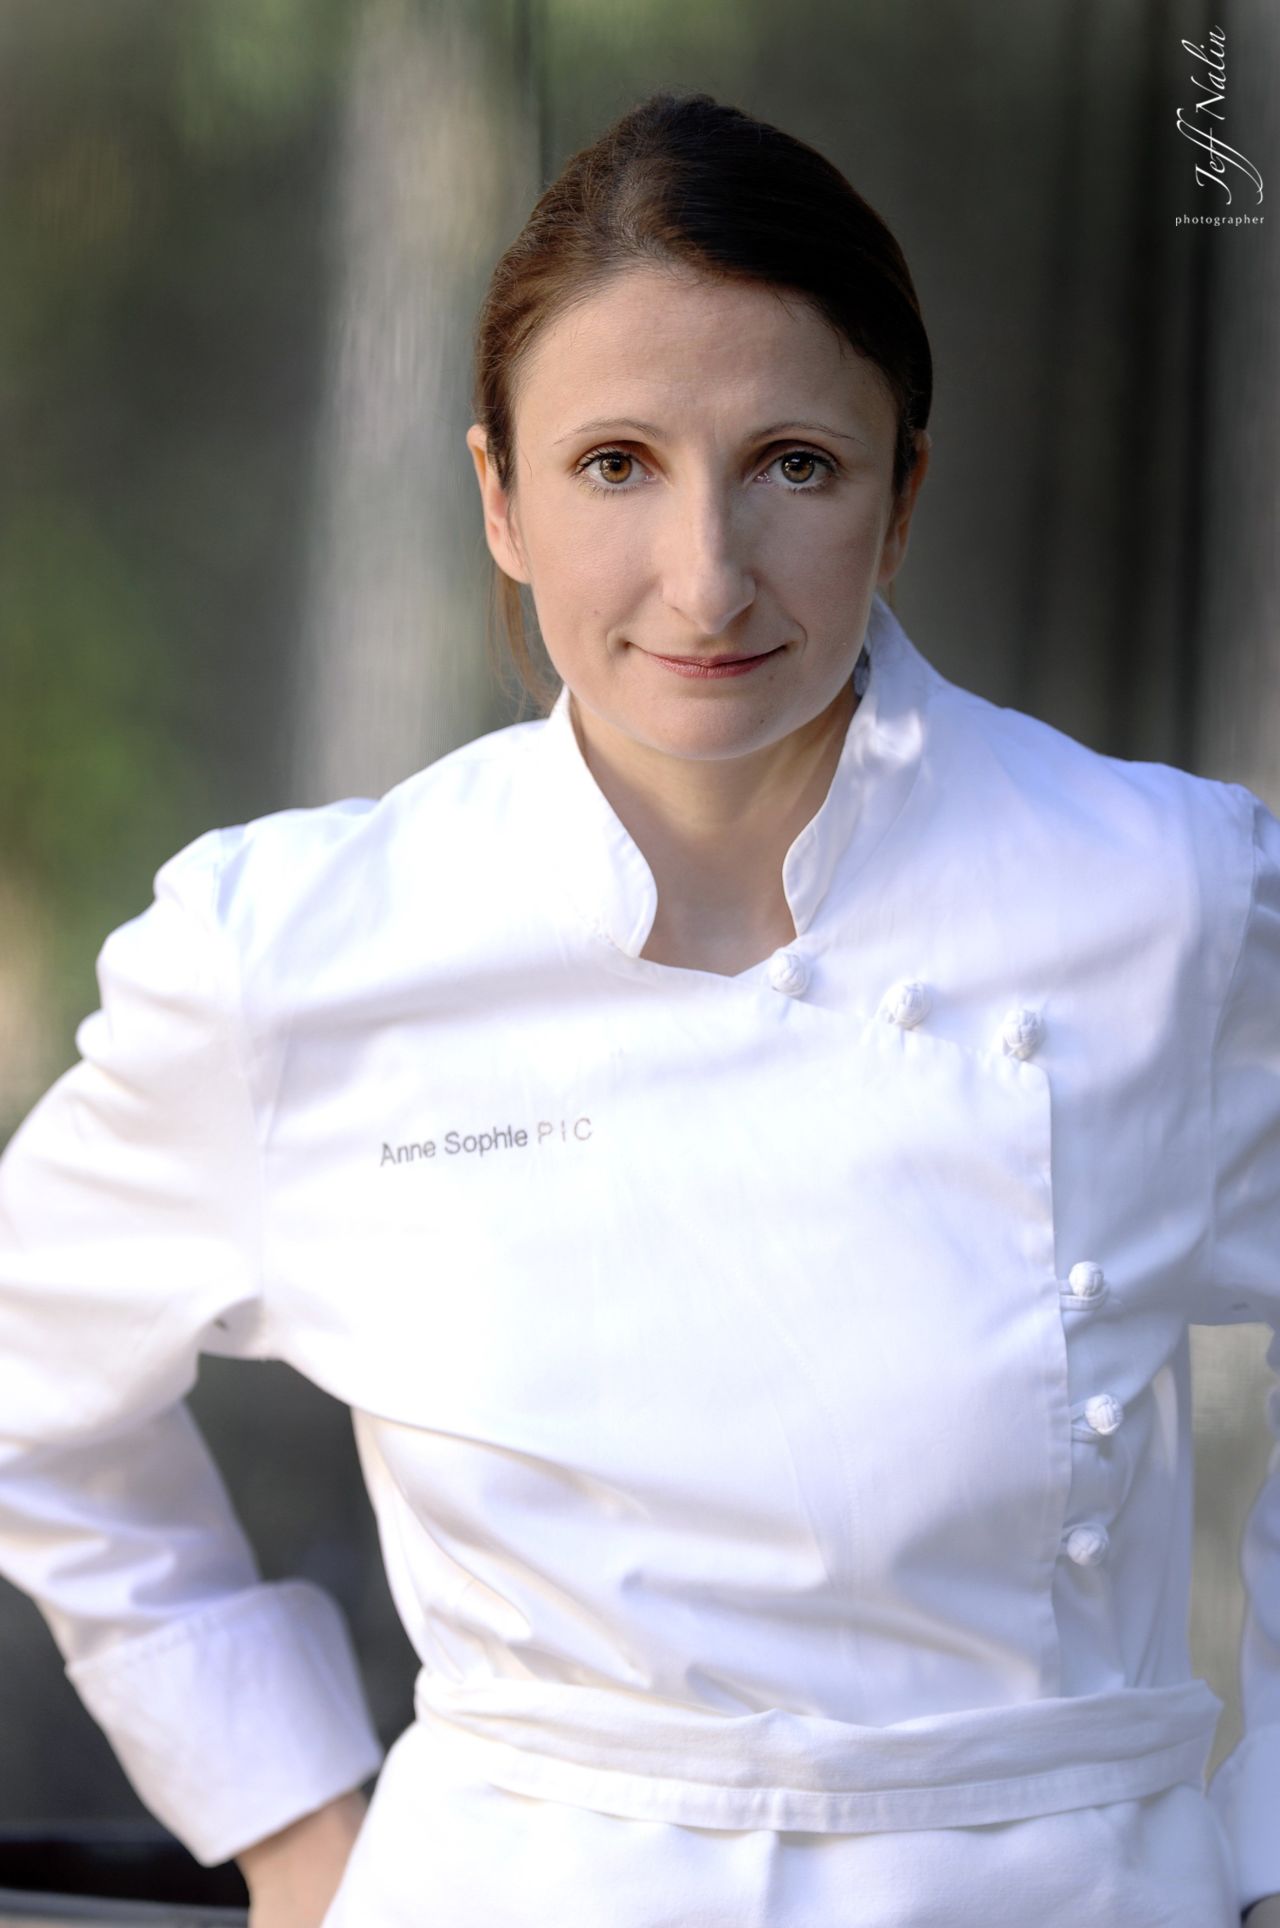 <strong>Sophie-Anne Pic:</strong> Head chef at <a href="https://www.fourseasons.com/tentrinity/dining/restaurants/la-dame-de-pic-london/" target="_blank" target="_blank">La Dame de Pic restaurant</a> at the Four Seasons hotel in London, Sophie-Anne Pic was the first recipient of the World's Best Female Chef award in 2011. 